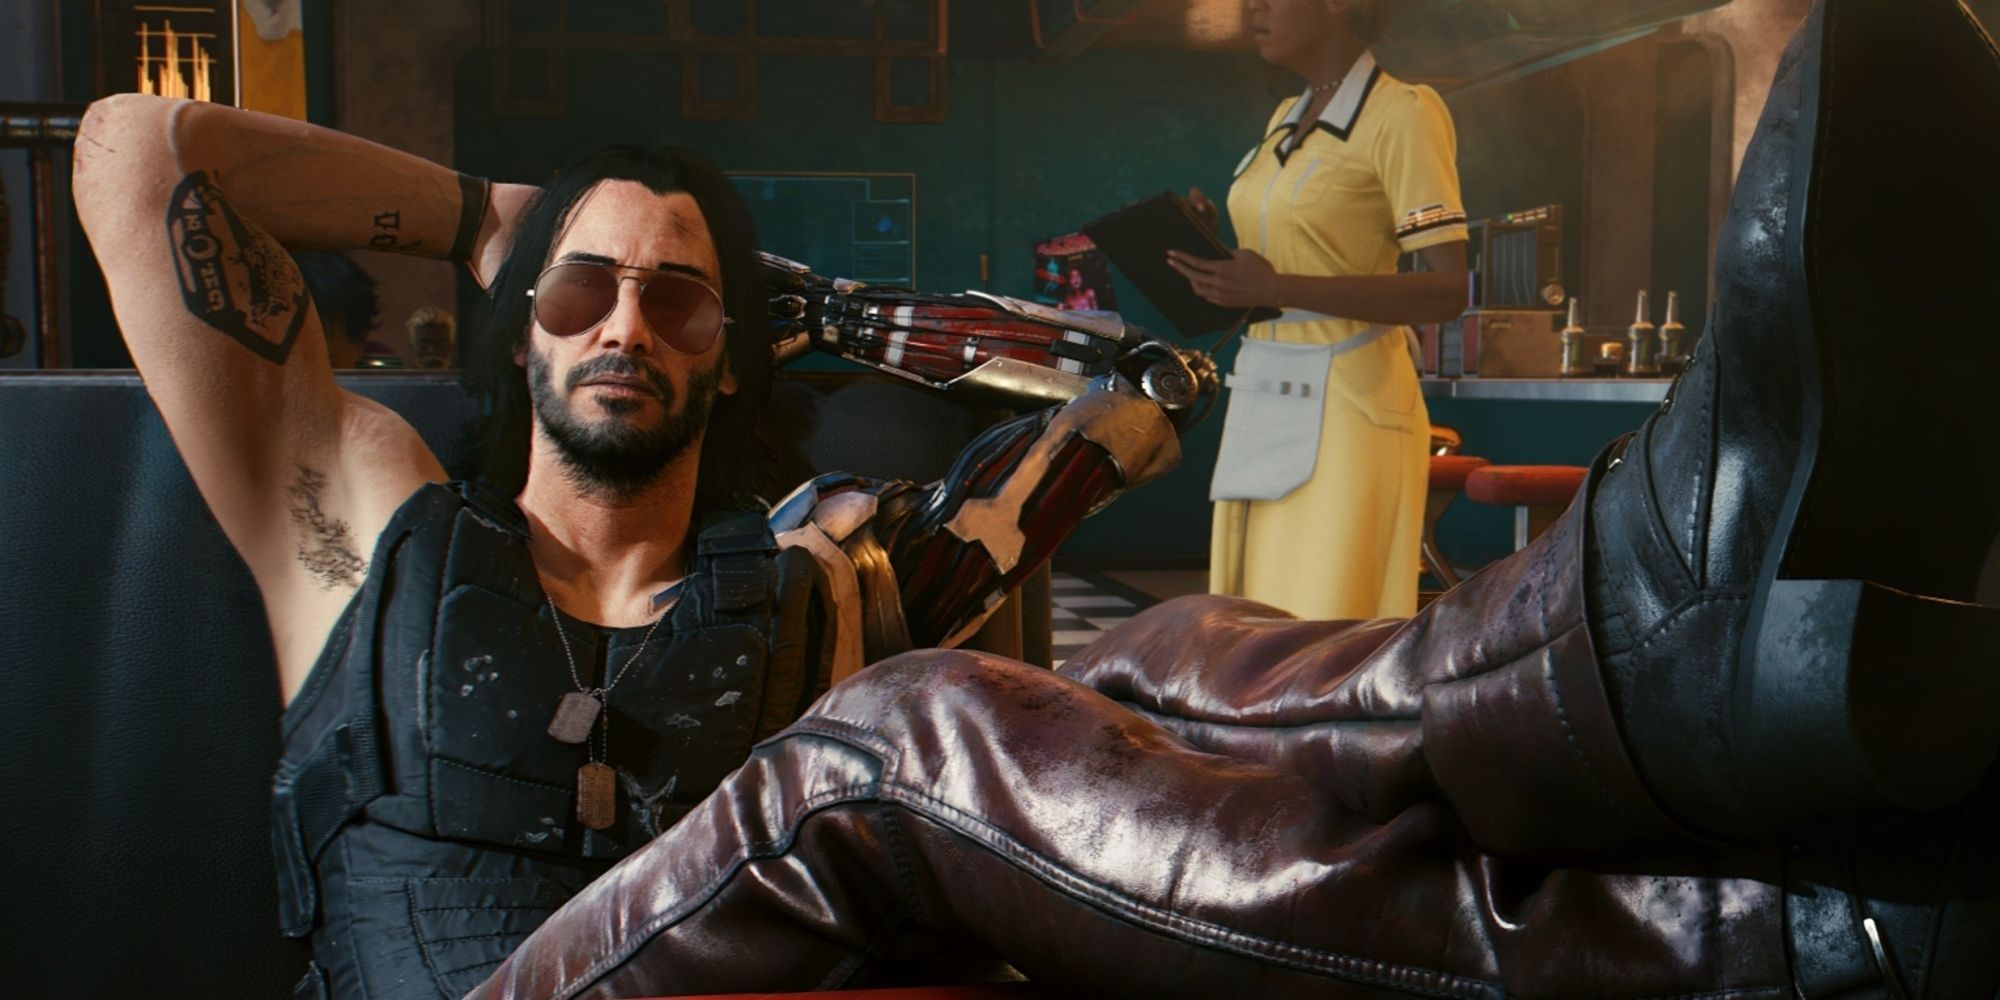 Cyberpunk 2077 Keanu Reeves as Johnny Silverhand kicking his feet back and relaxed in a booth ata diner.